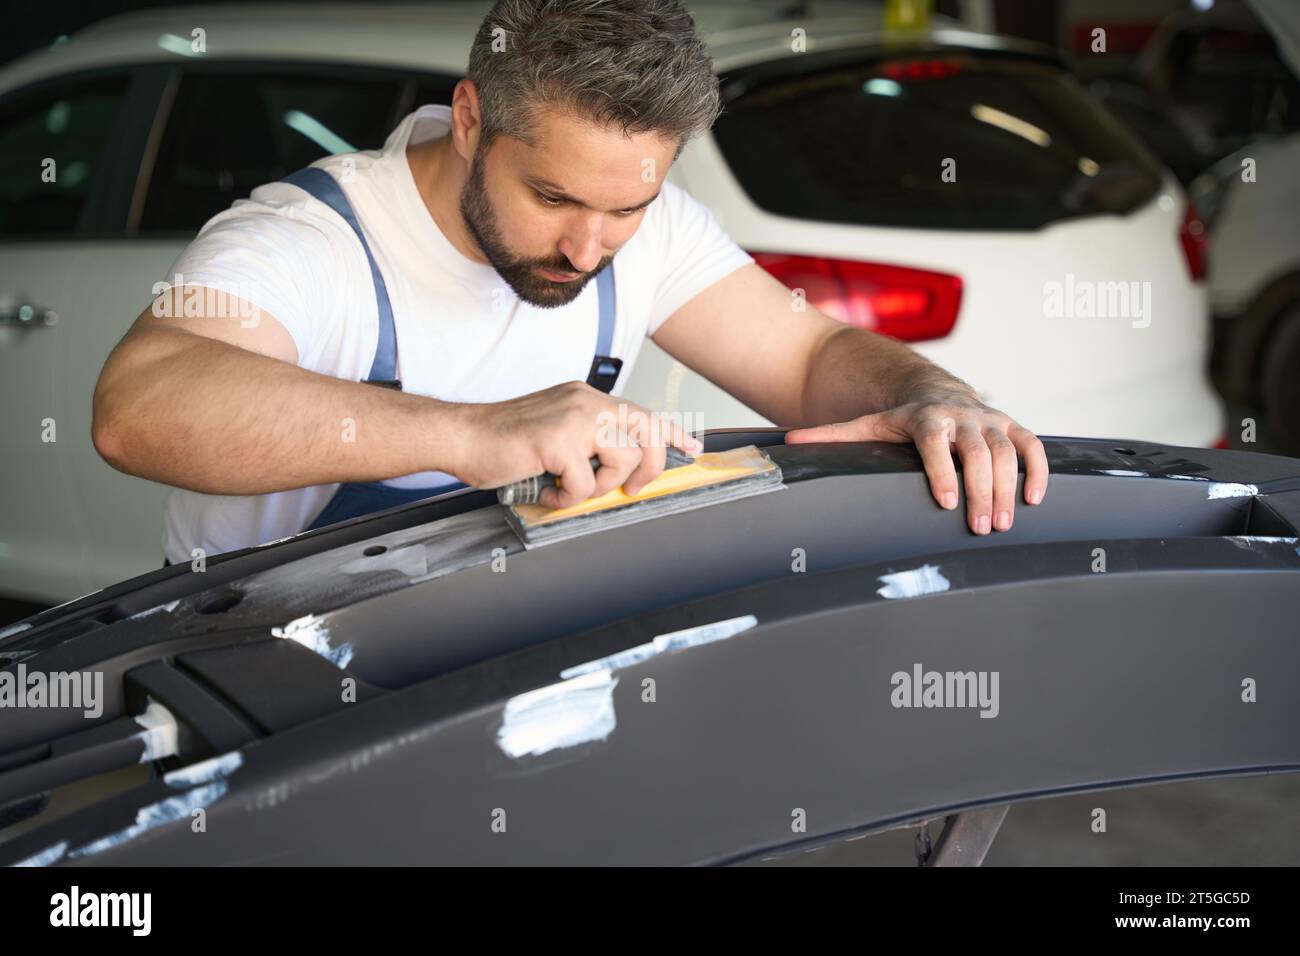 Experienced car detailer buffing automotive body part Stock Photo